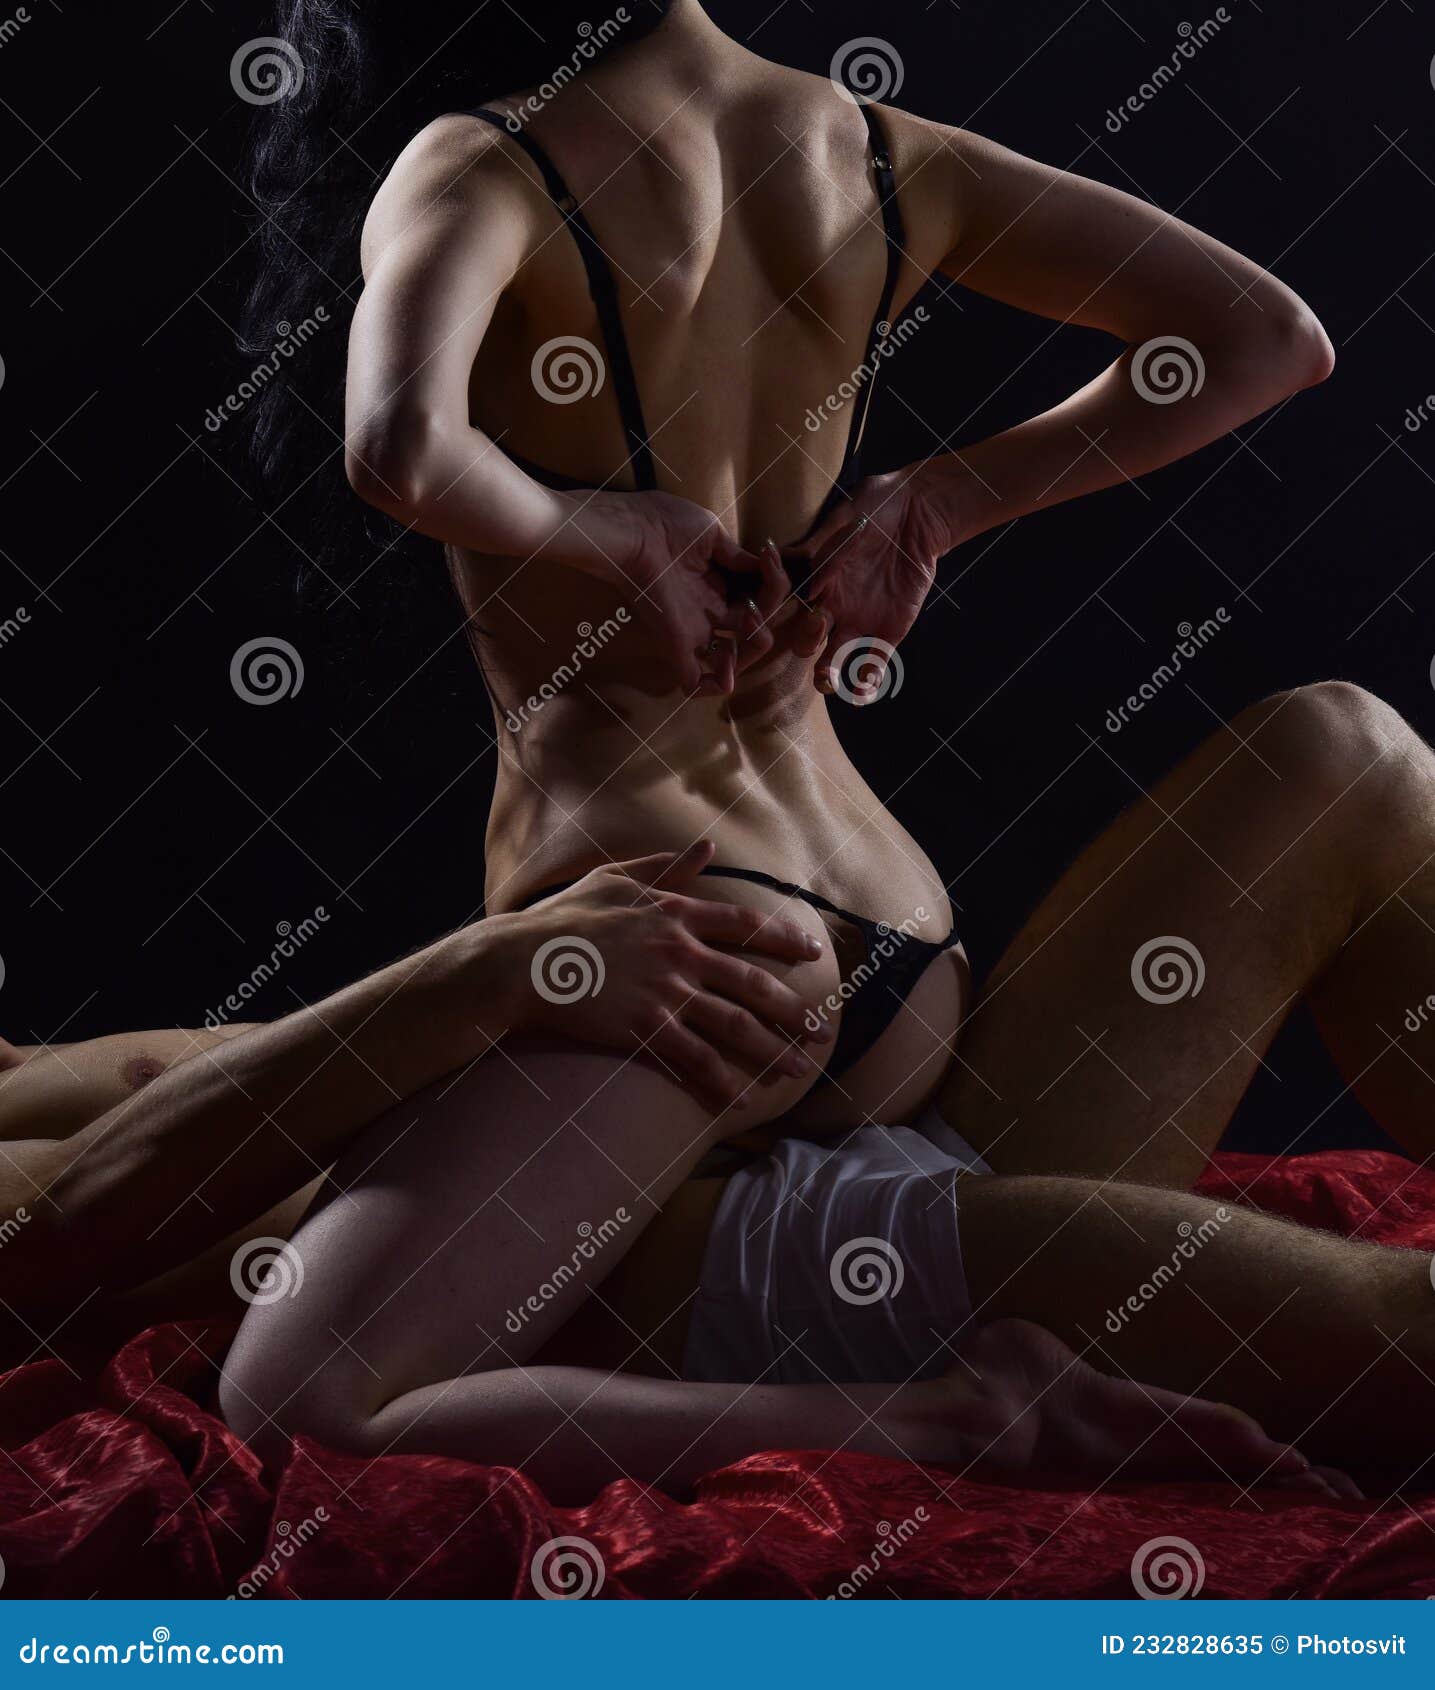 Sensual Couple in Love of Naked Man and Woman Having Sex Games in Bed, Sexual Health Stock Image pic